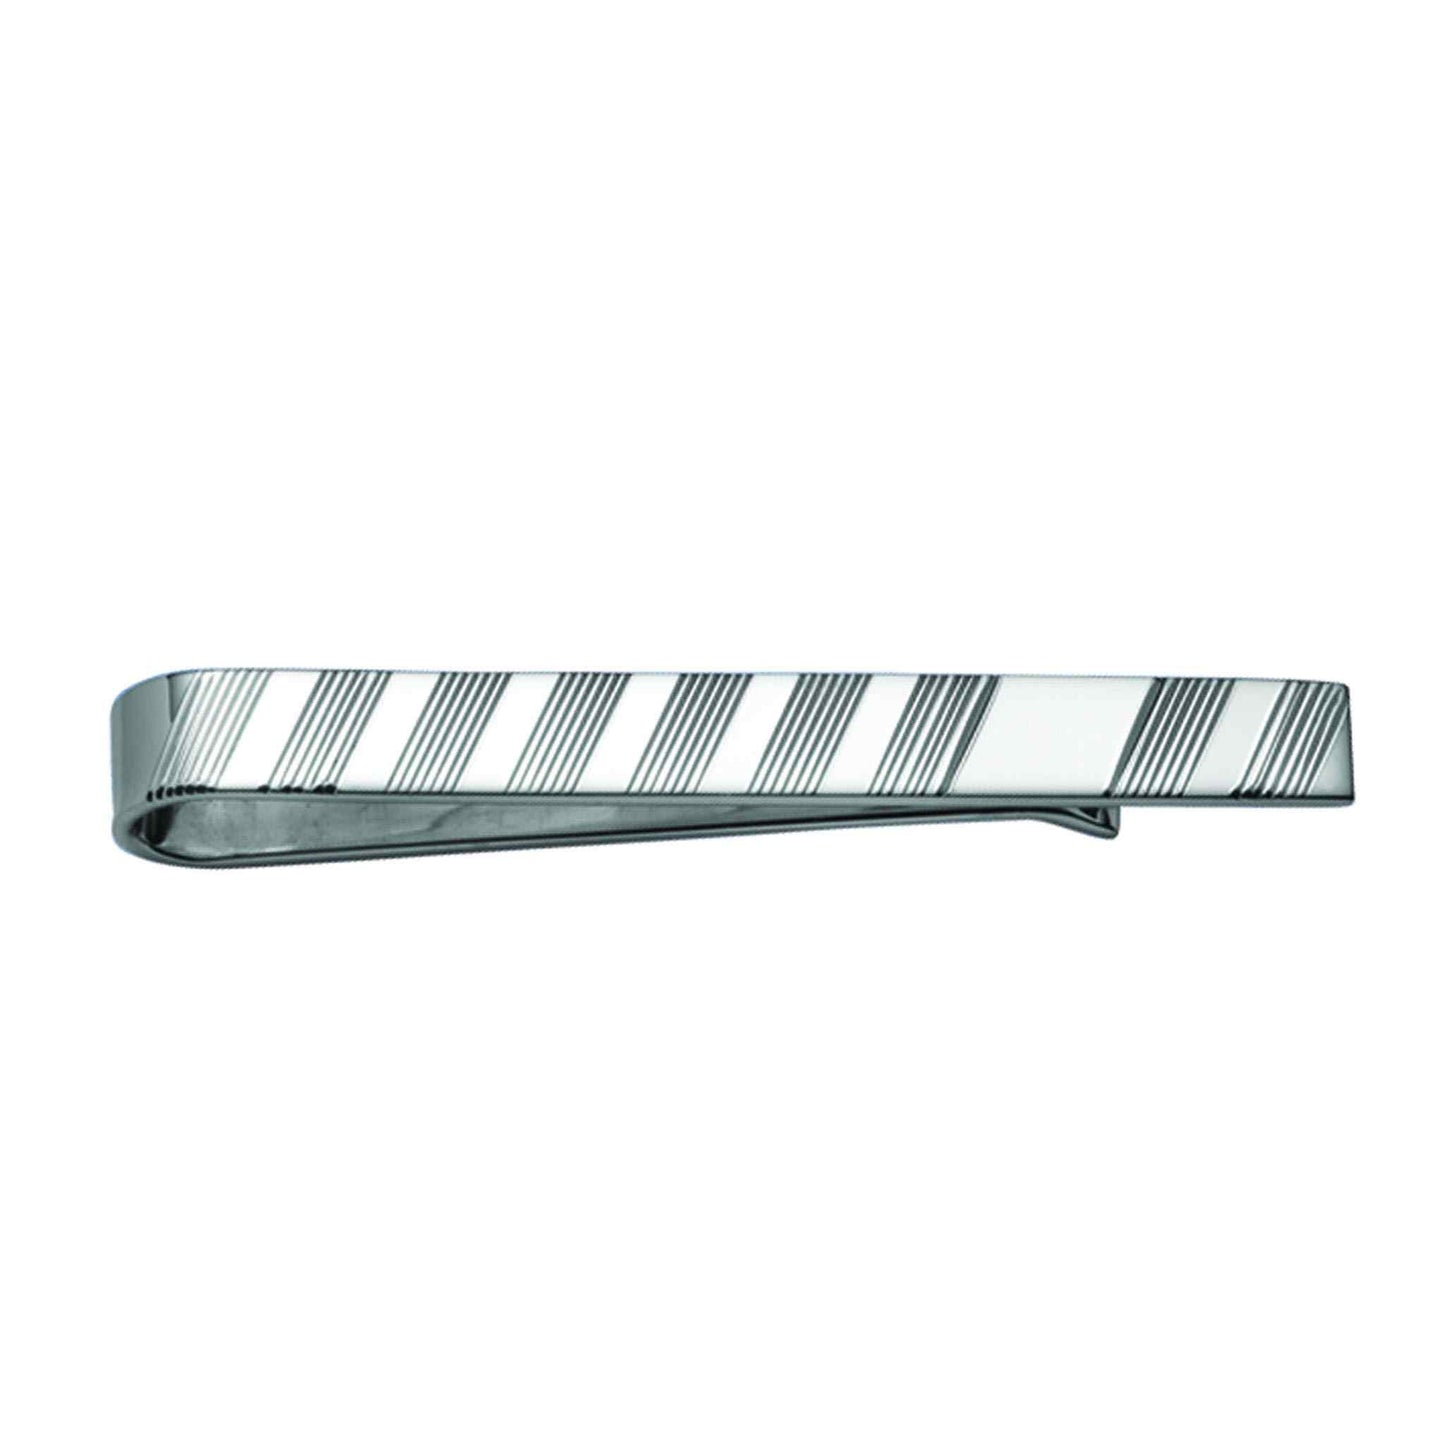 A sterling silver diagonal tie slide displayed on a neutral white background.